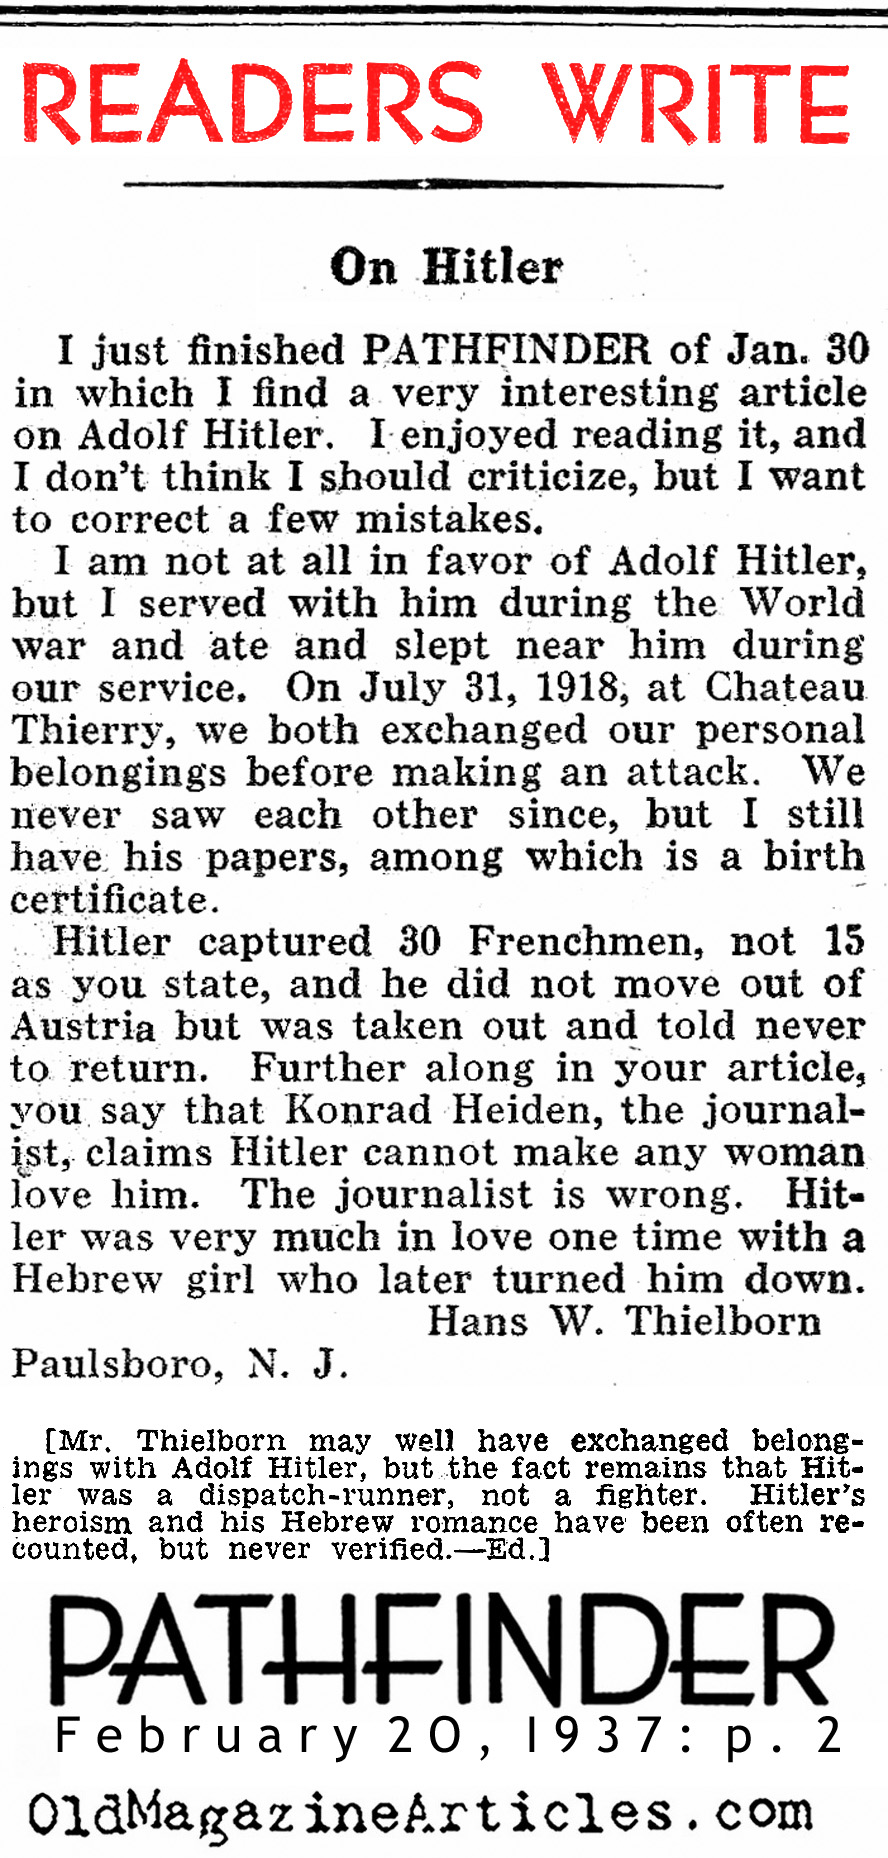 Hitler Was At Chateau Thierry? (Pathfinder Magazine, 1937)